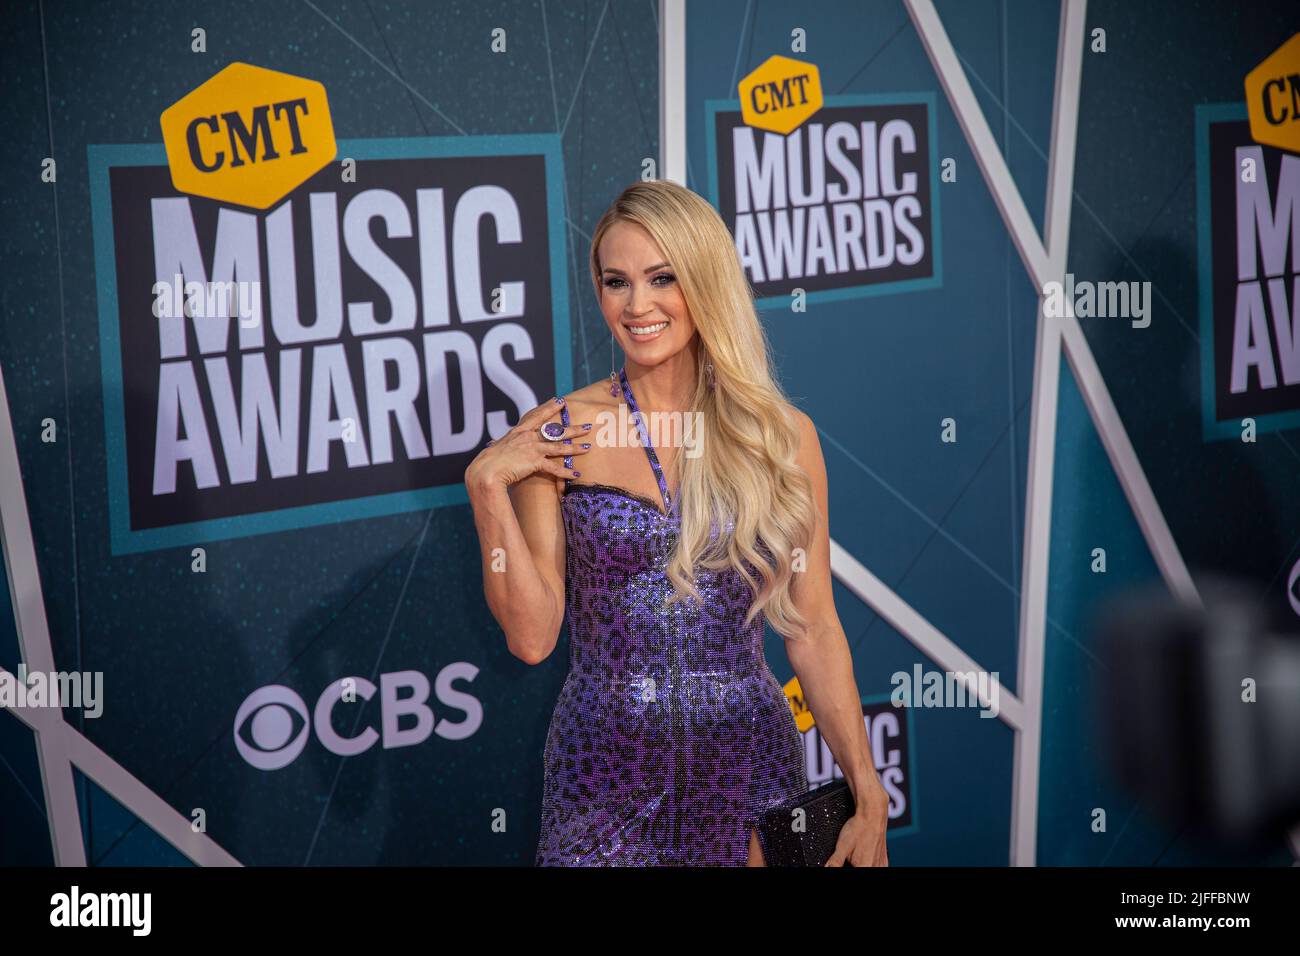 Nashville, Tenn. - April 11, 2022 Carrie Underwood arrives at the red carpet for the 2022 CMT Awards on April 11, 2022 at Municipal Auditorium in Nashville, Tenn. Credit: Jamie Gilliam/The Photo Access Stock Photo